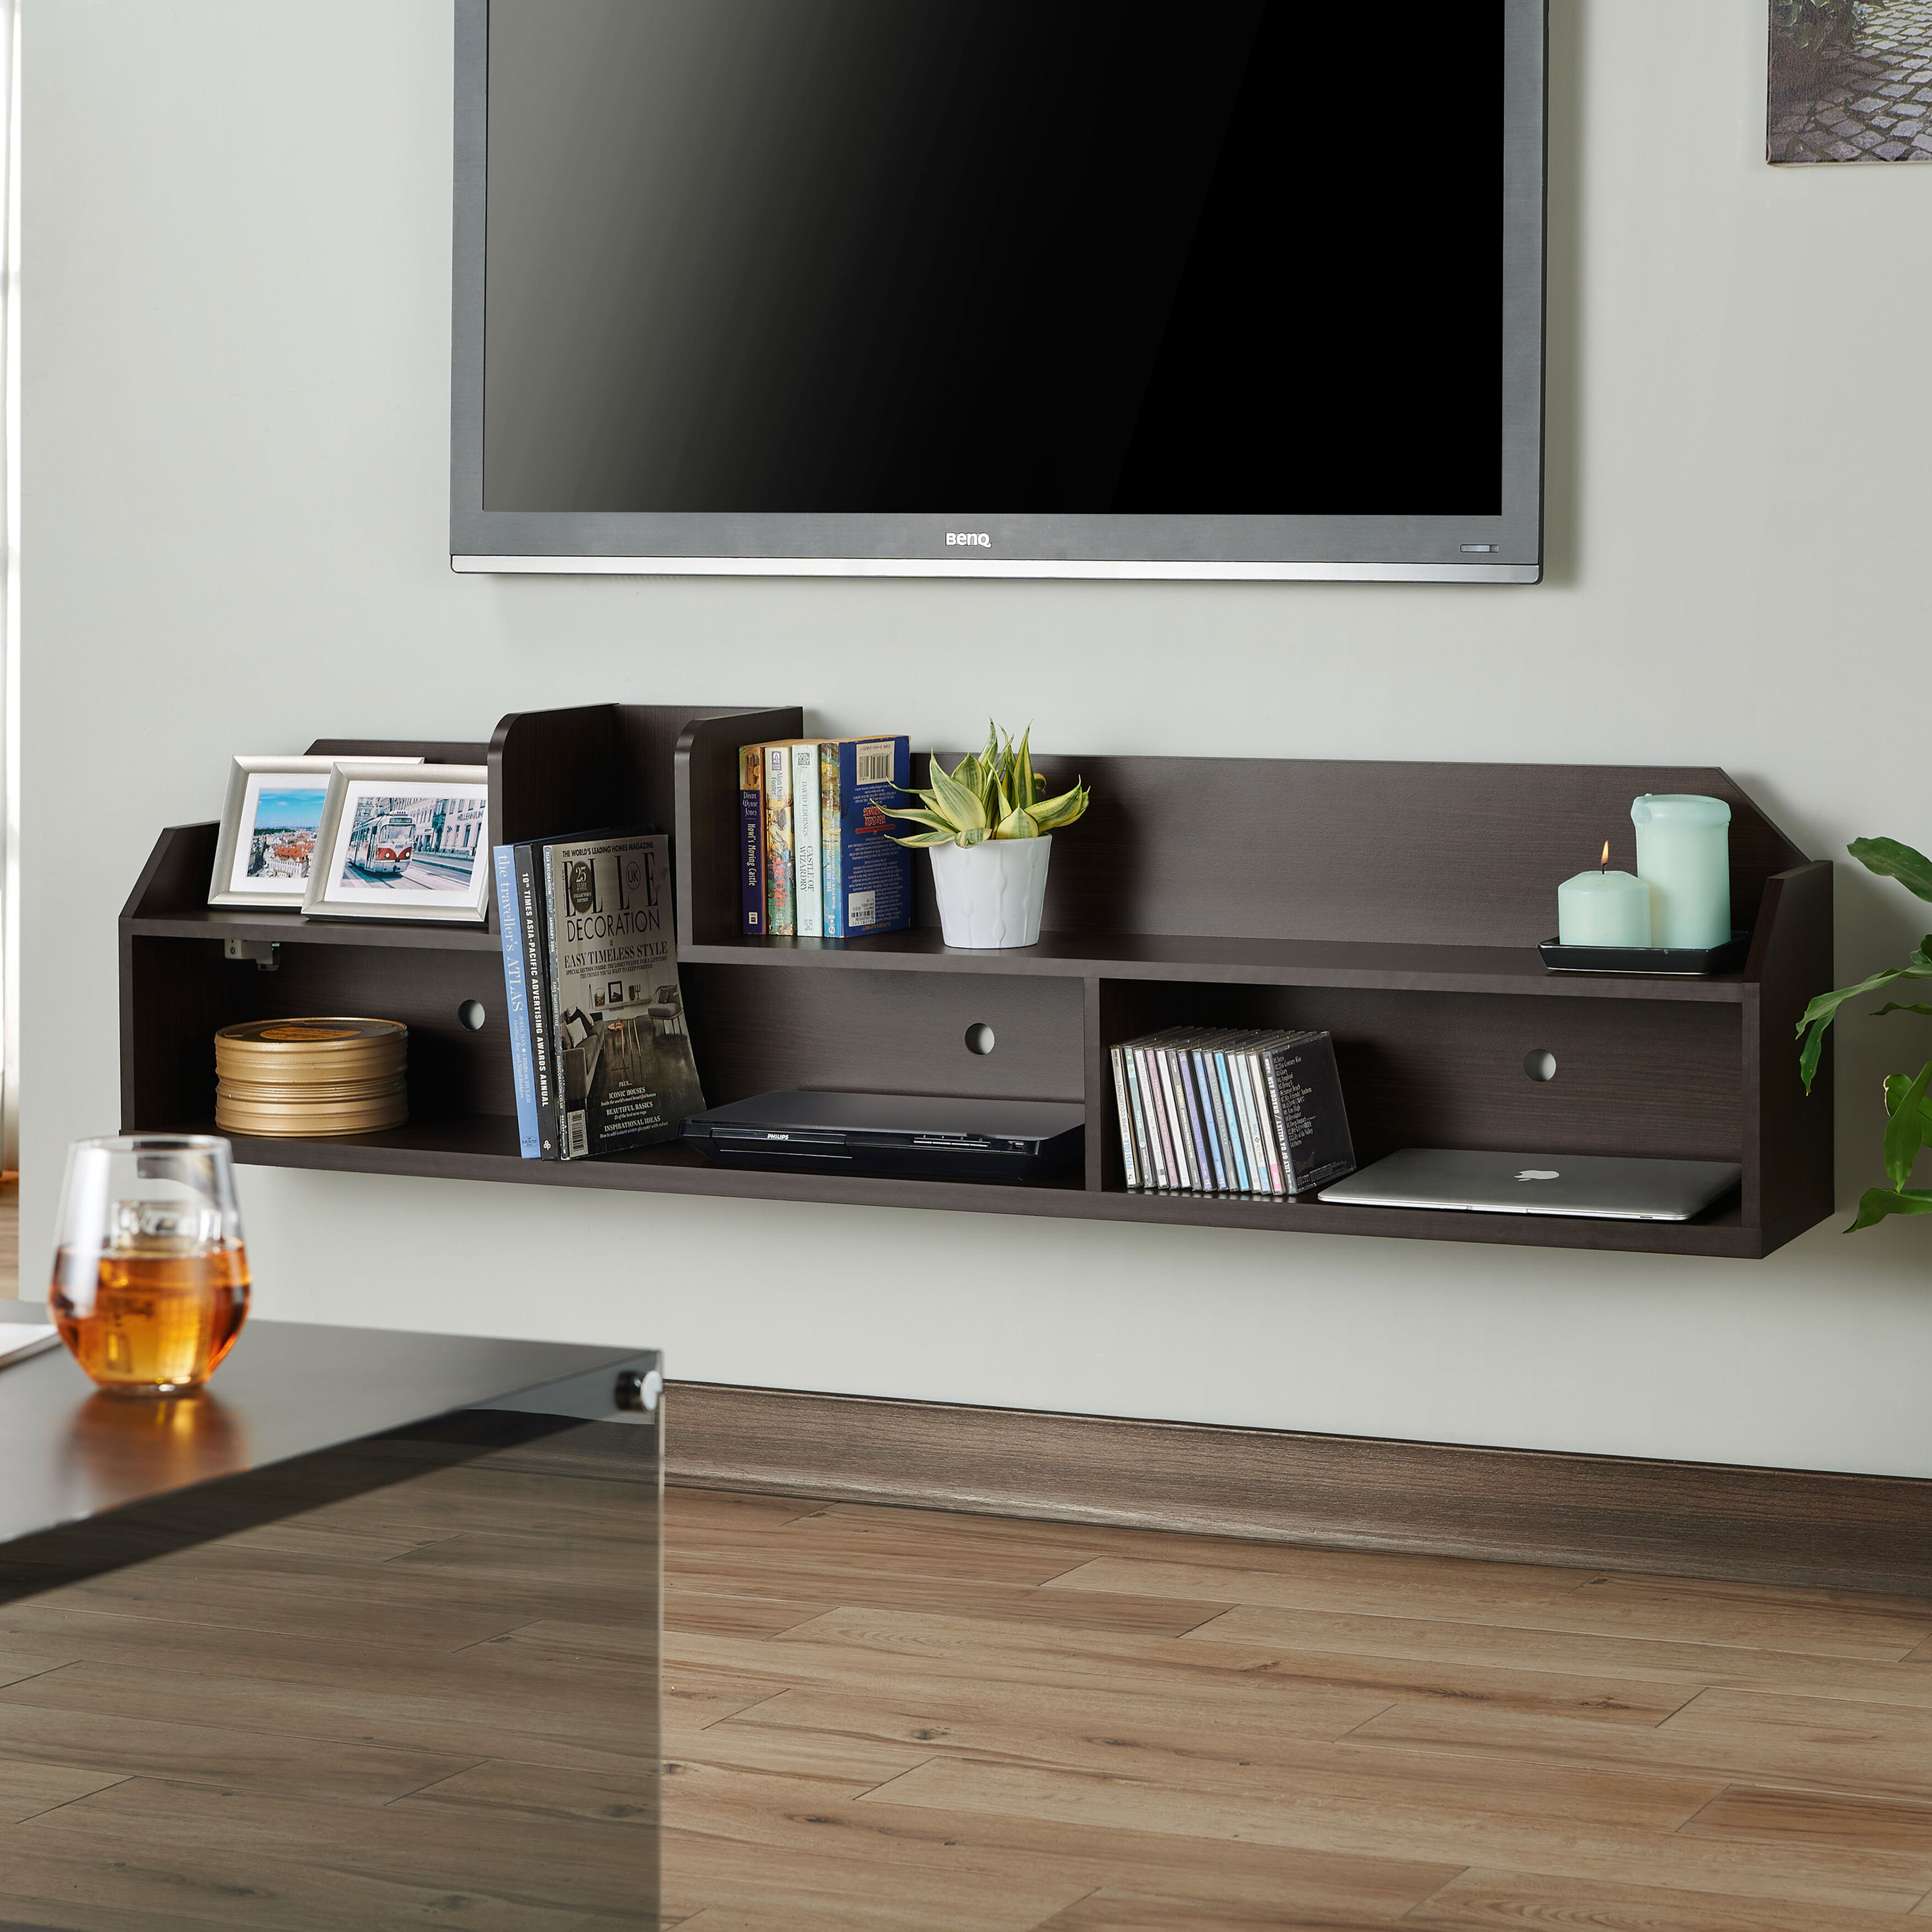 Featured image of post Wood Floating Tv Stand / Well, did you know that there are floating tv stands too?